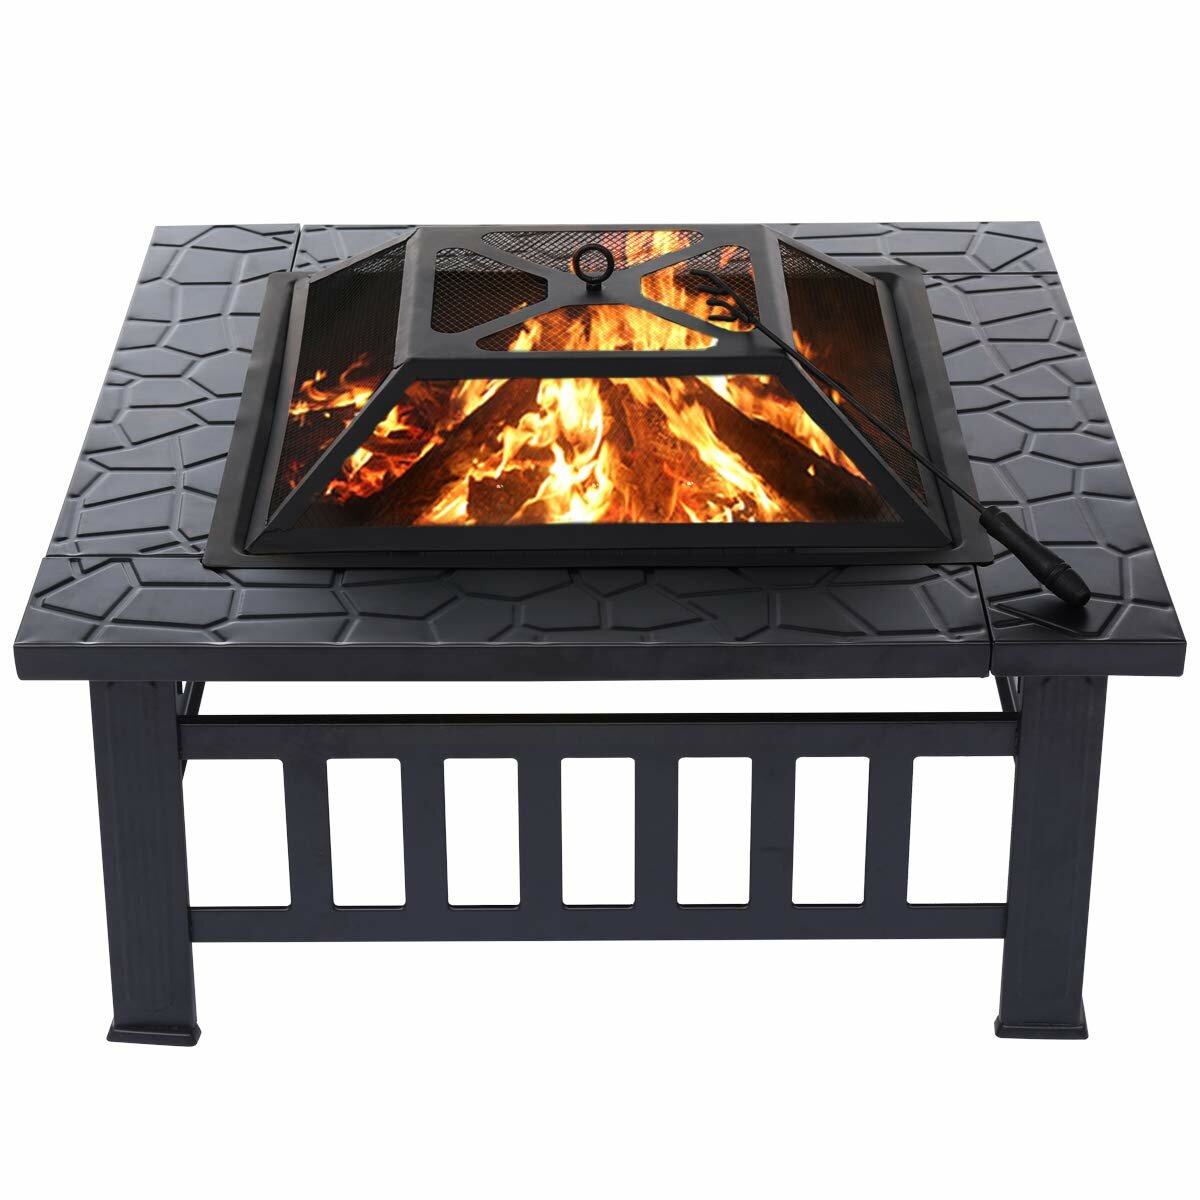 32inch Outdoor Fire Pit Metal Square Wood Burning Stove BBQ Grill Pit Bowl with Spark Screen Cover Log Grate Poker Outdoor Camping Picnic